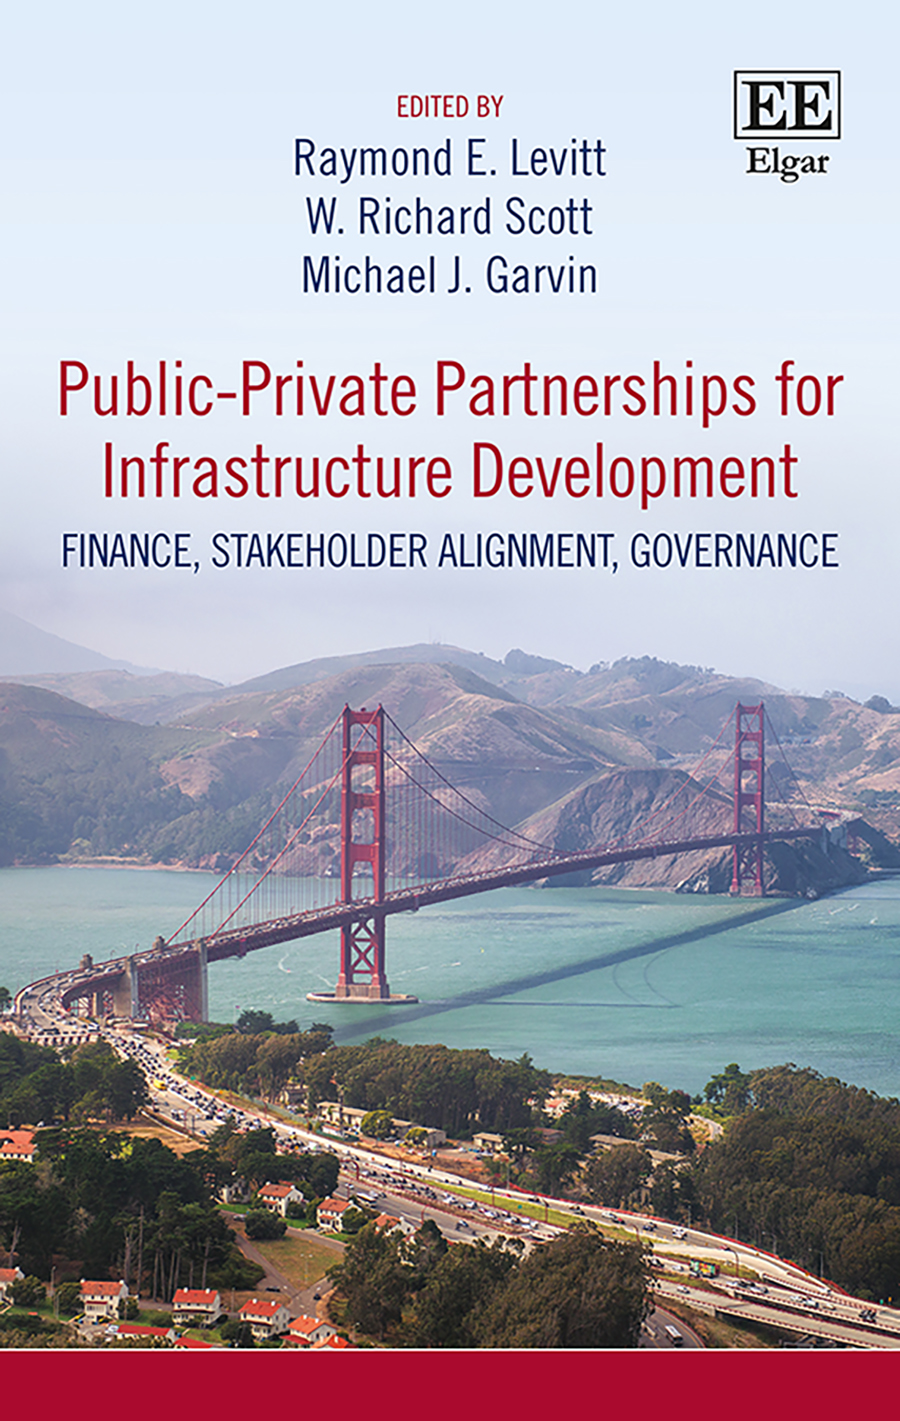 Public-Private Partnerships for Infrastructure Development